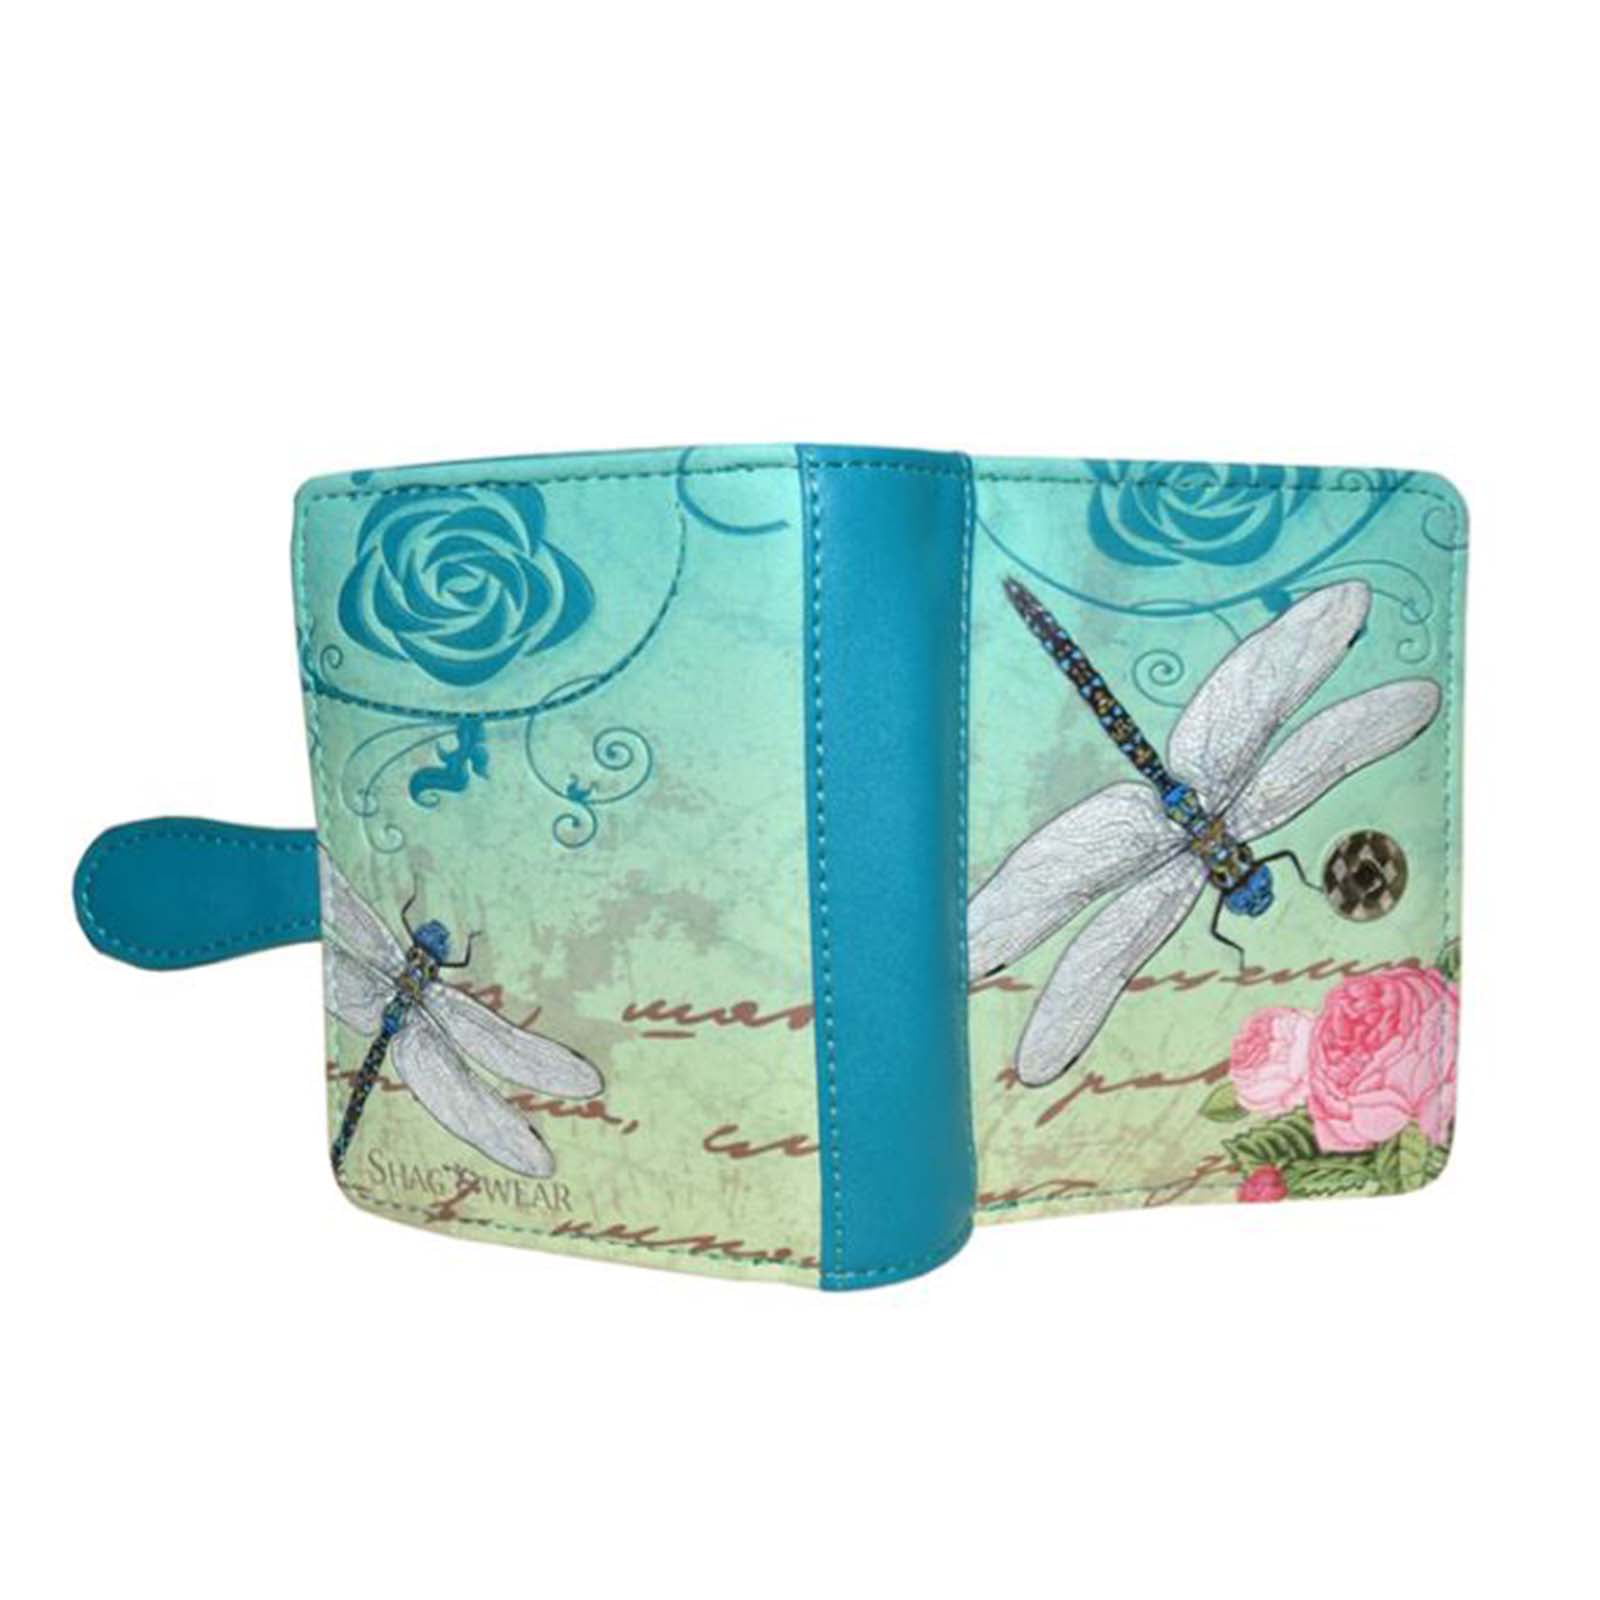 Shagwear Ladies Wallet Small Purse Various birds and insects designs 